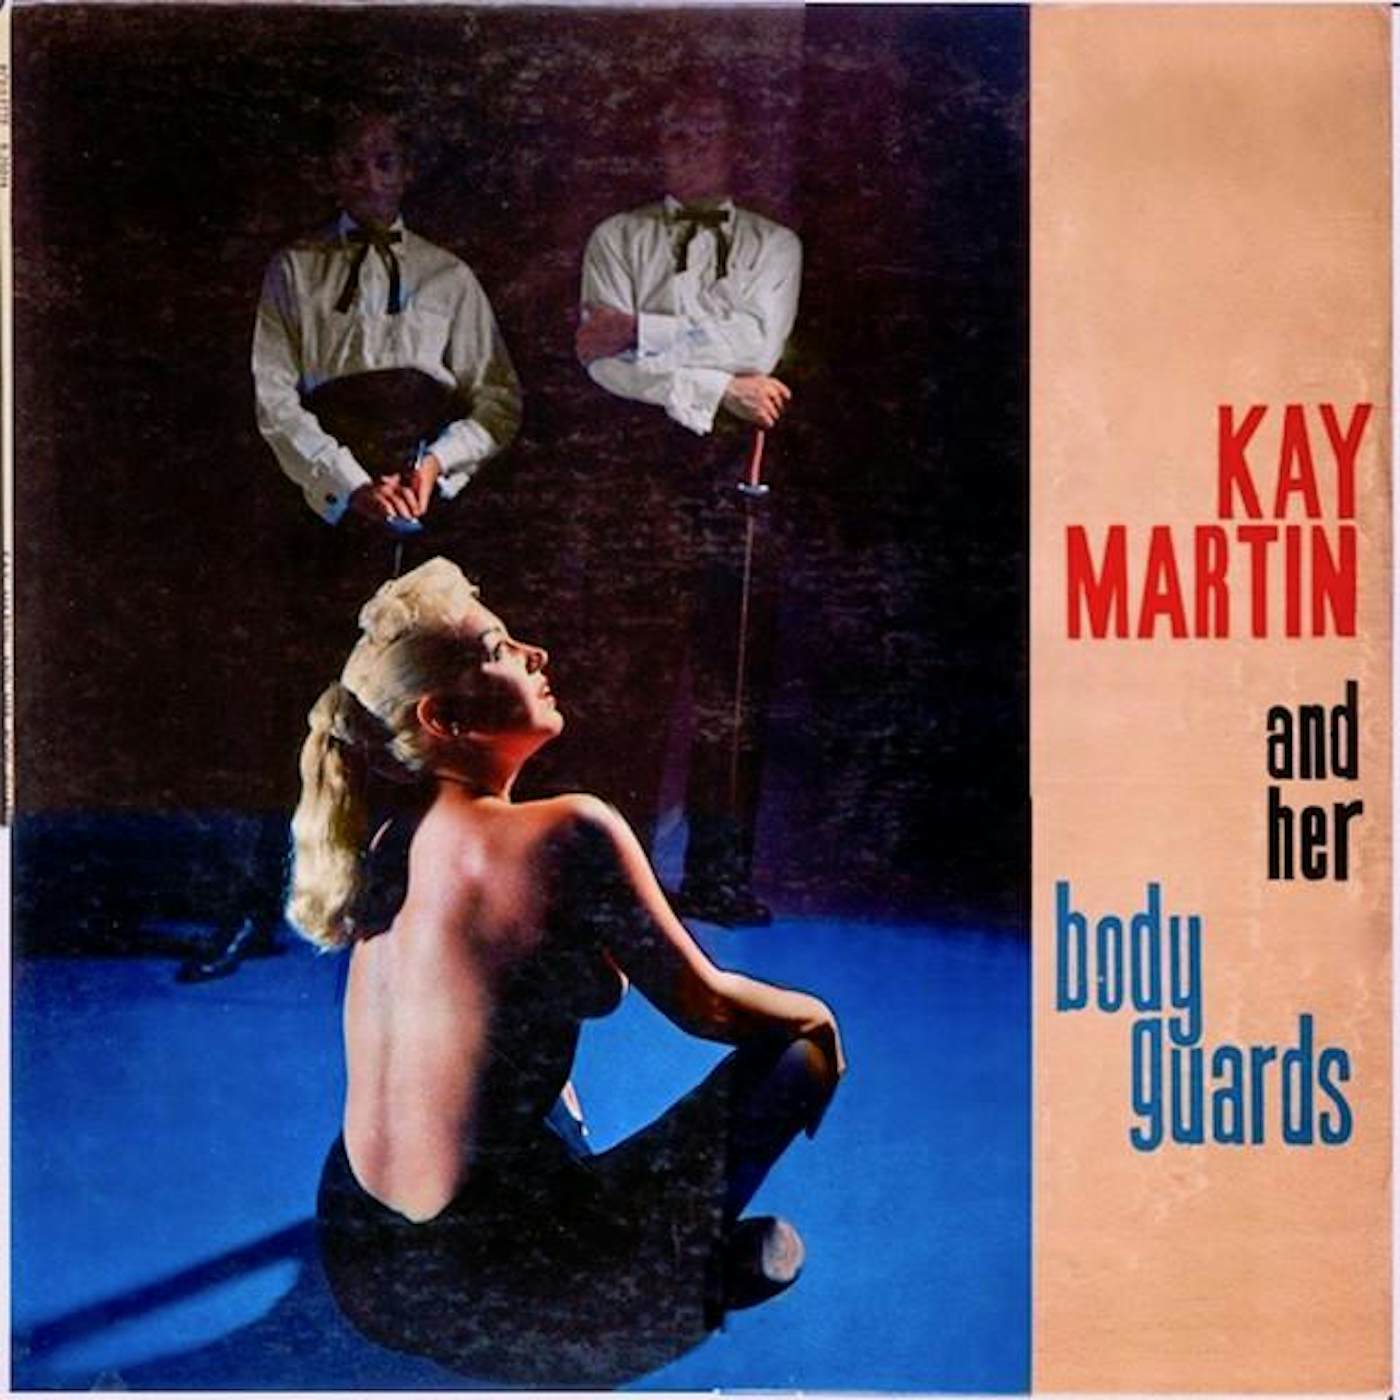 Kay Martin & Her Body Guards